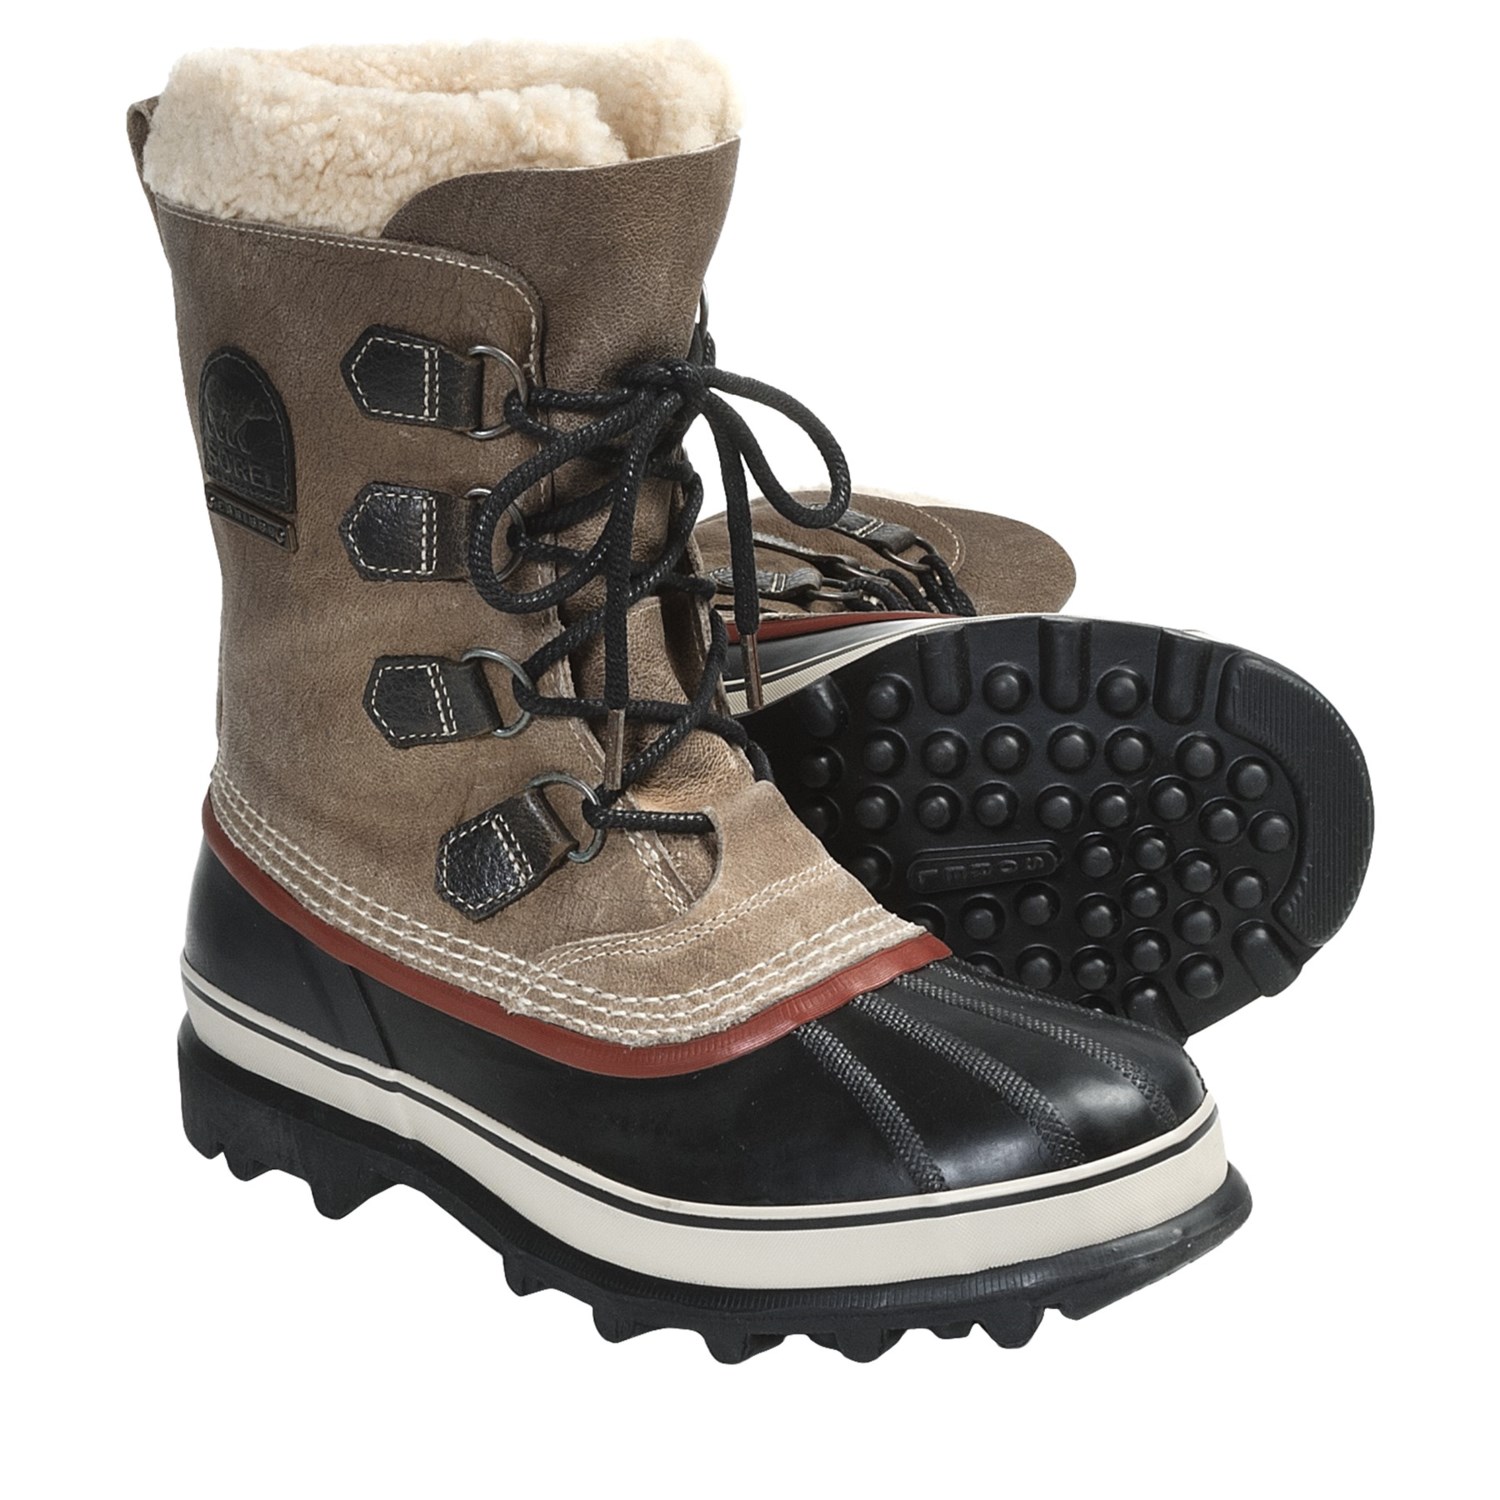 Waterproof Snow Boots Mens - Yu Boots